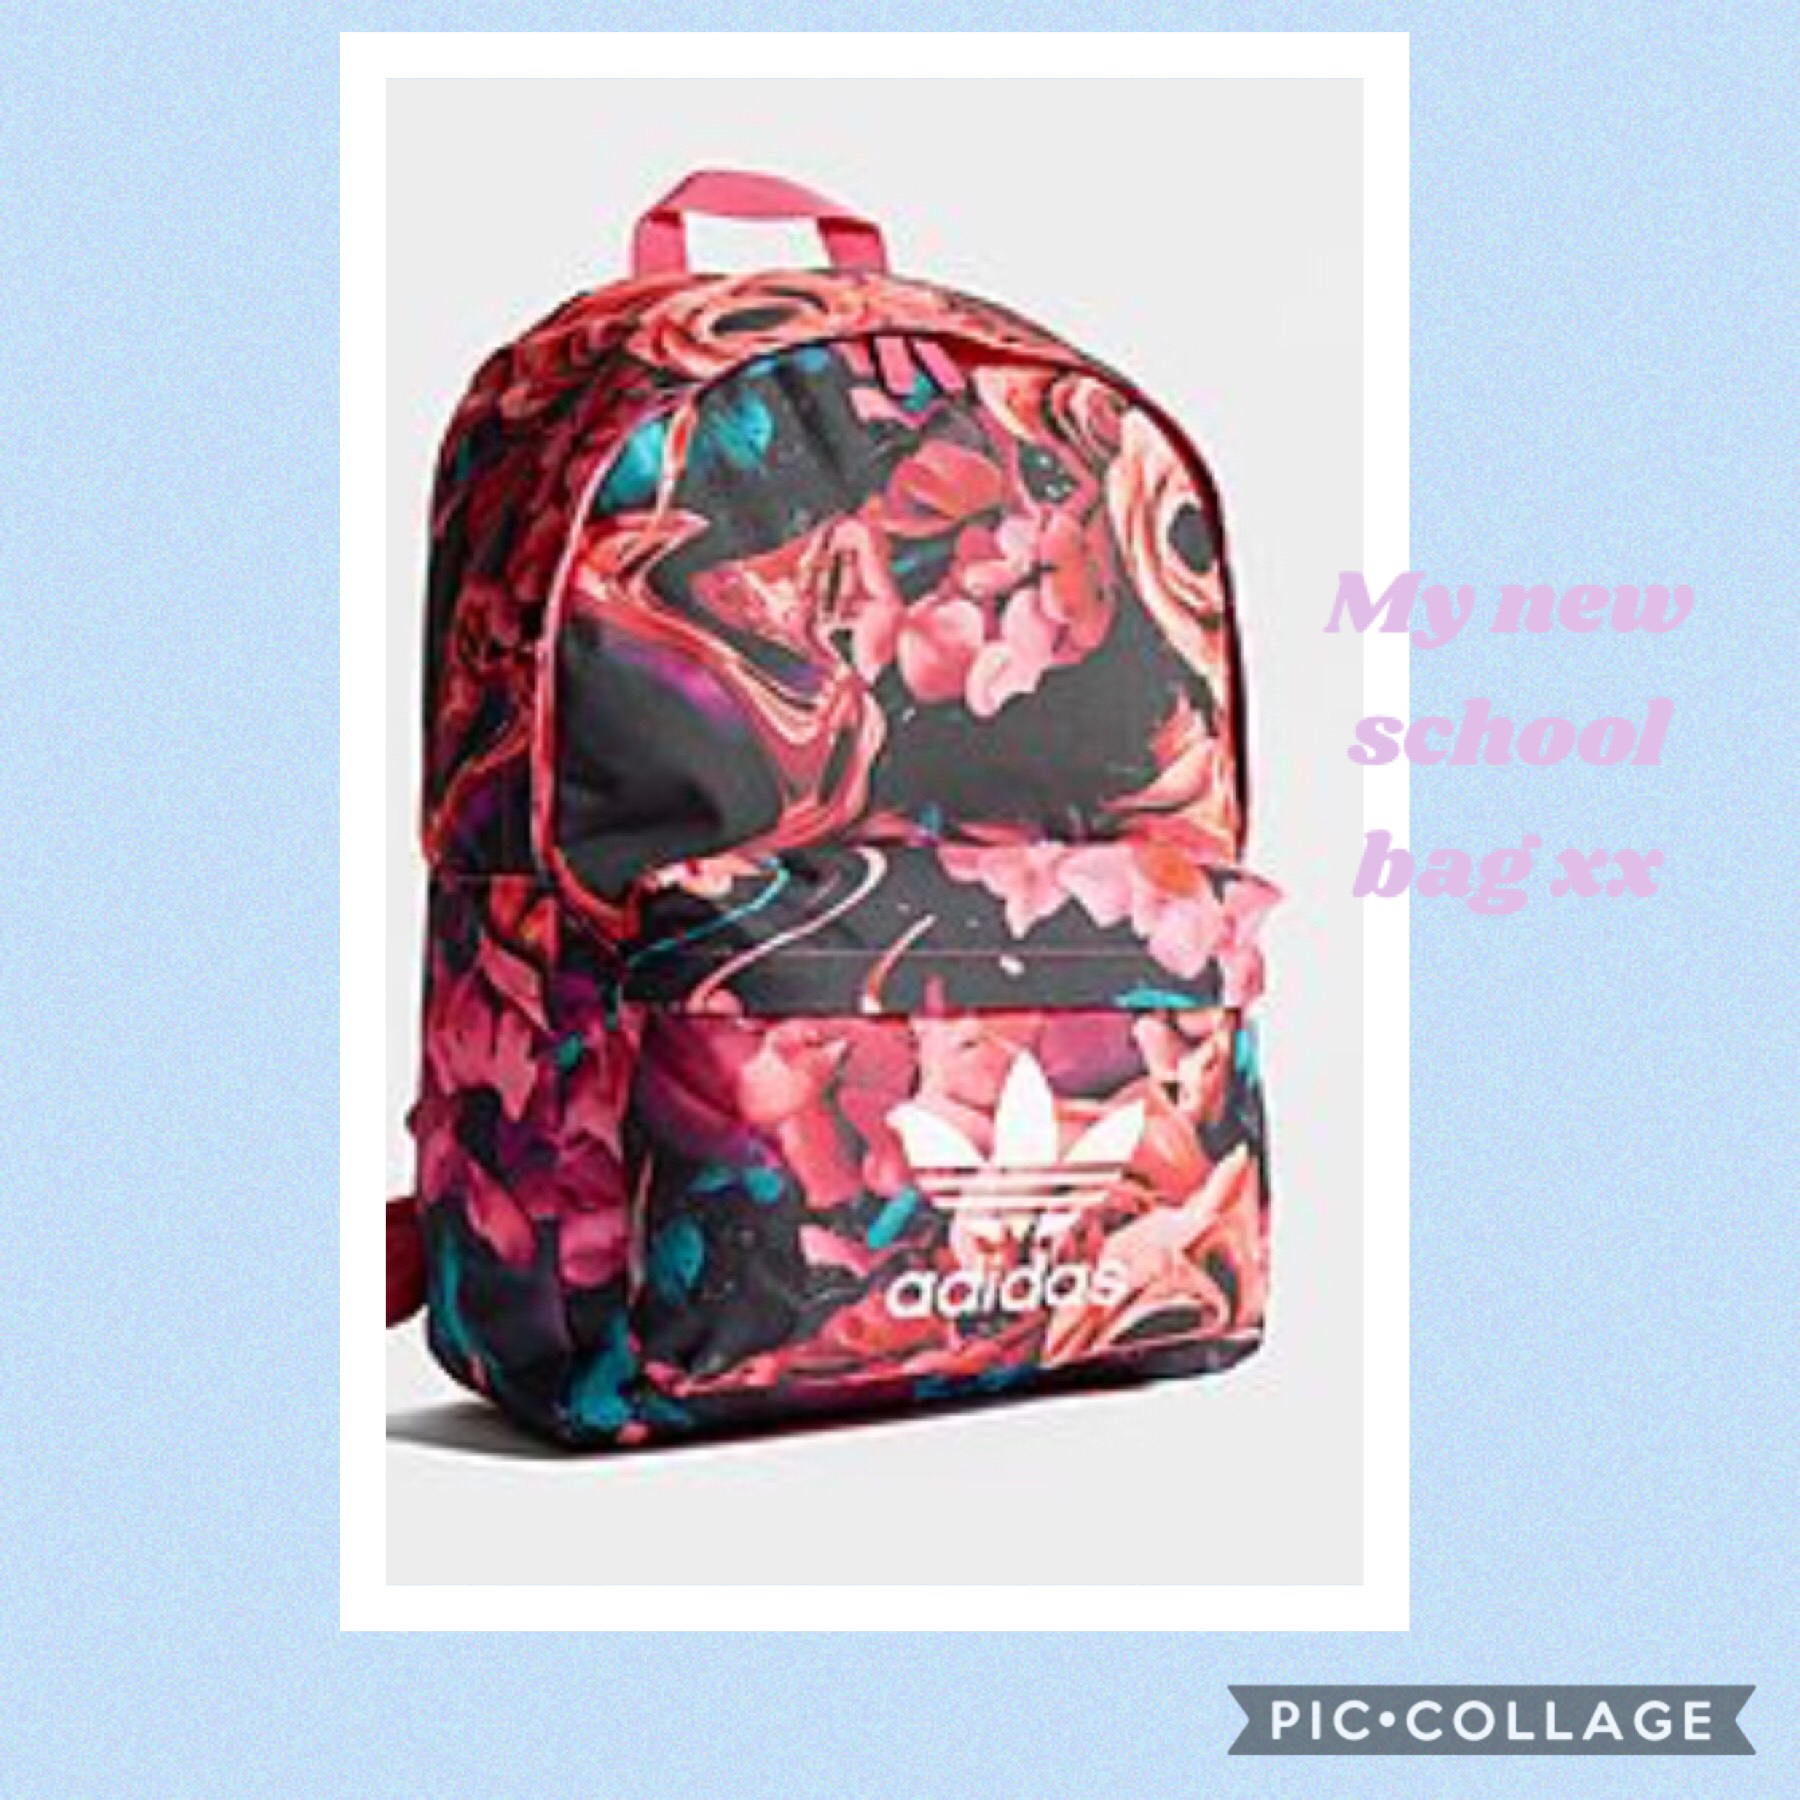 Do you like it send pic of your school bags or if you don’t need one send a x
Xx